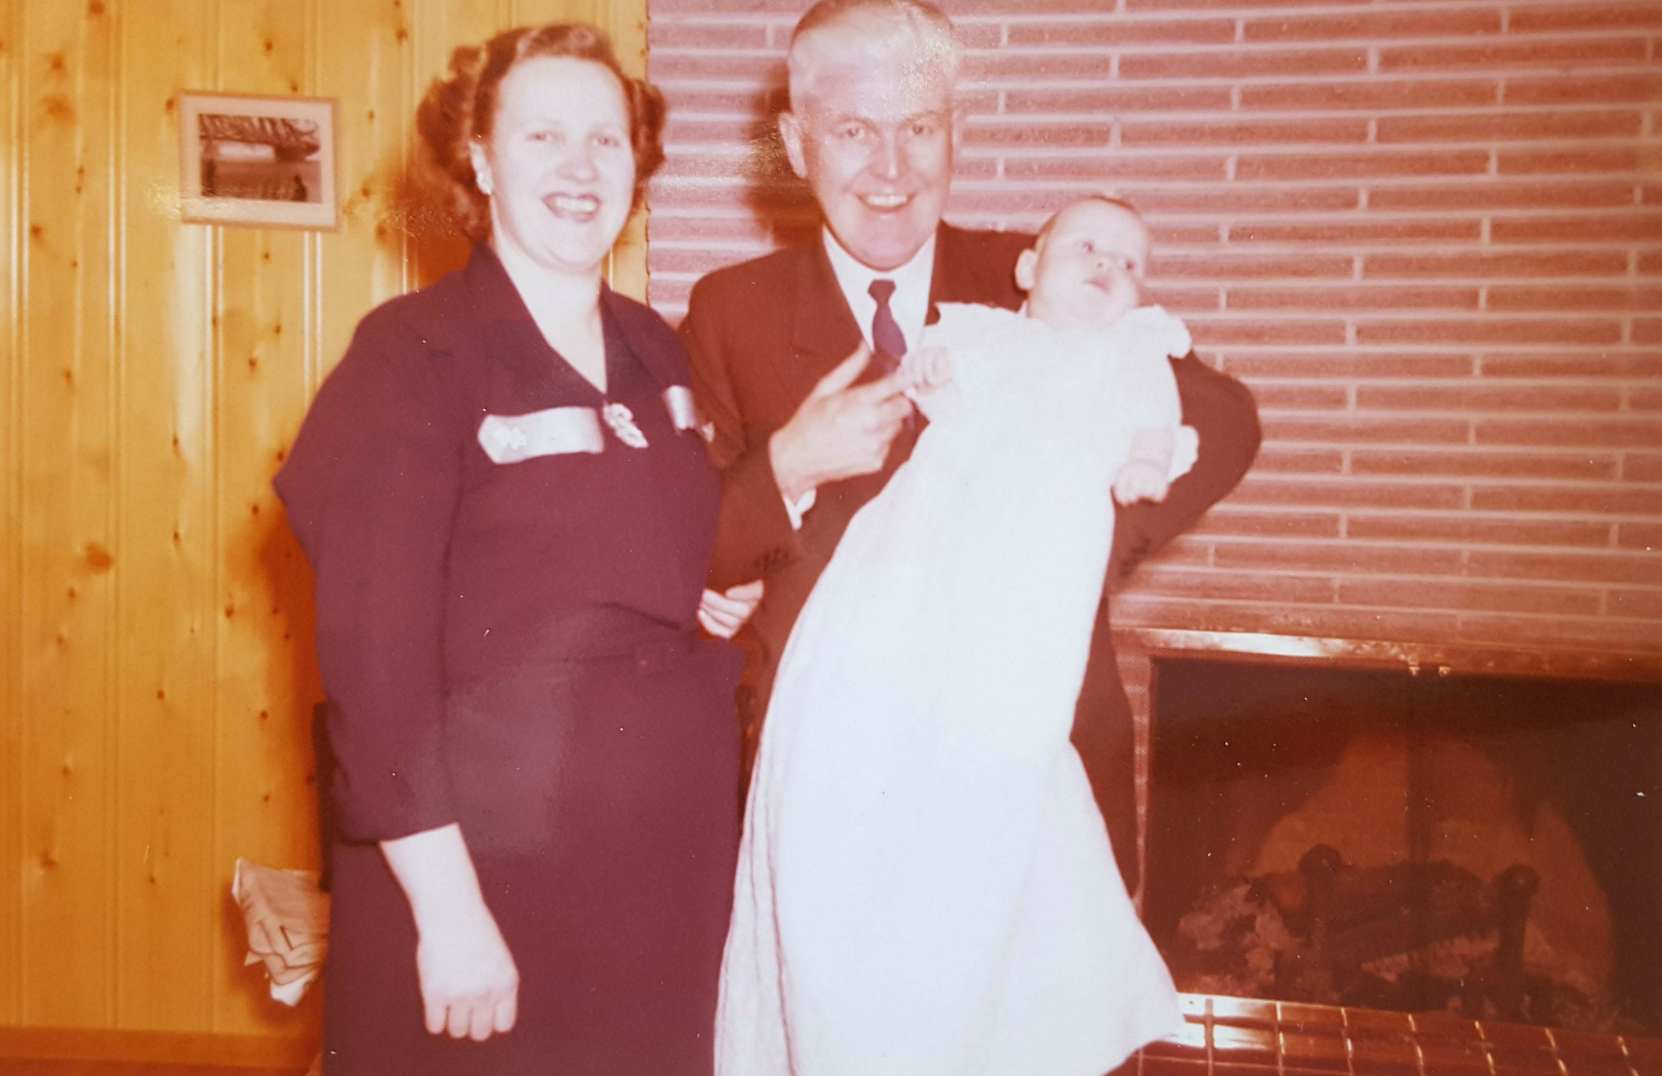 Richard "Bucky" Kennett and his family in 1959. The child in the photo is now one of the owners of Bucky's Sport Shop (photo courtesy of the Kennett family & Bucky's Sport Shop - used with permission)